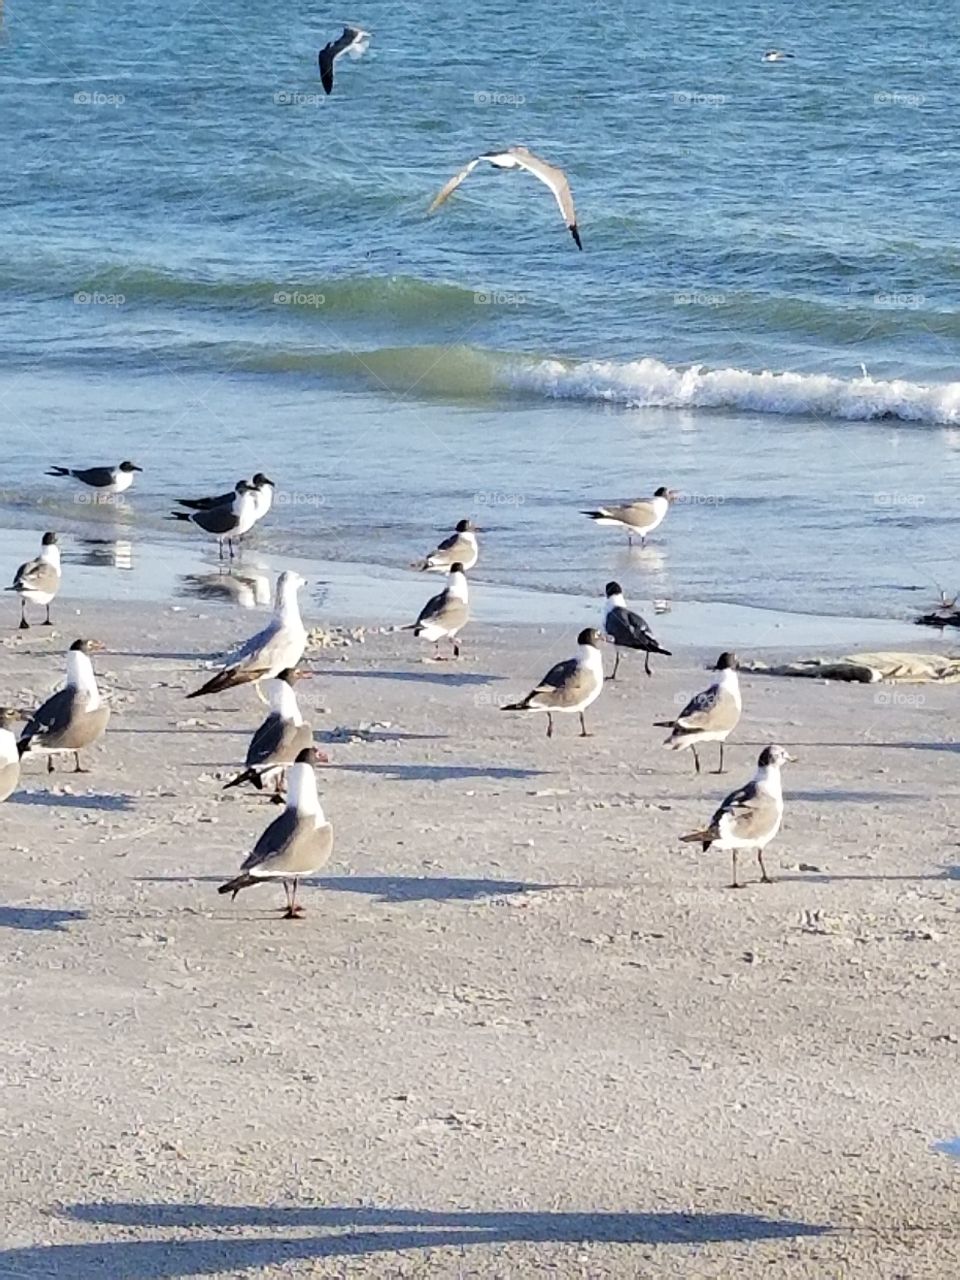 Dinner time for the waterfowl at the beach